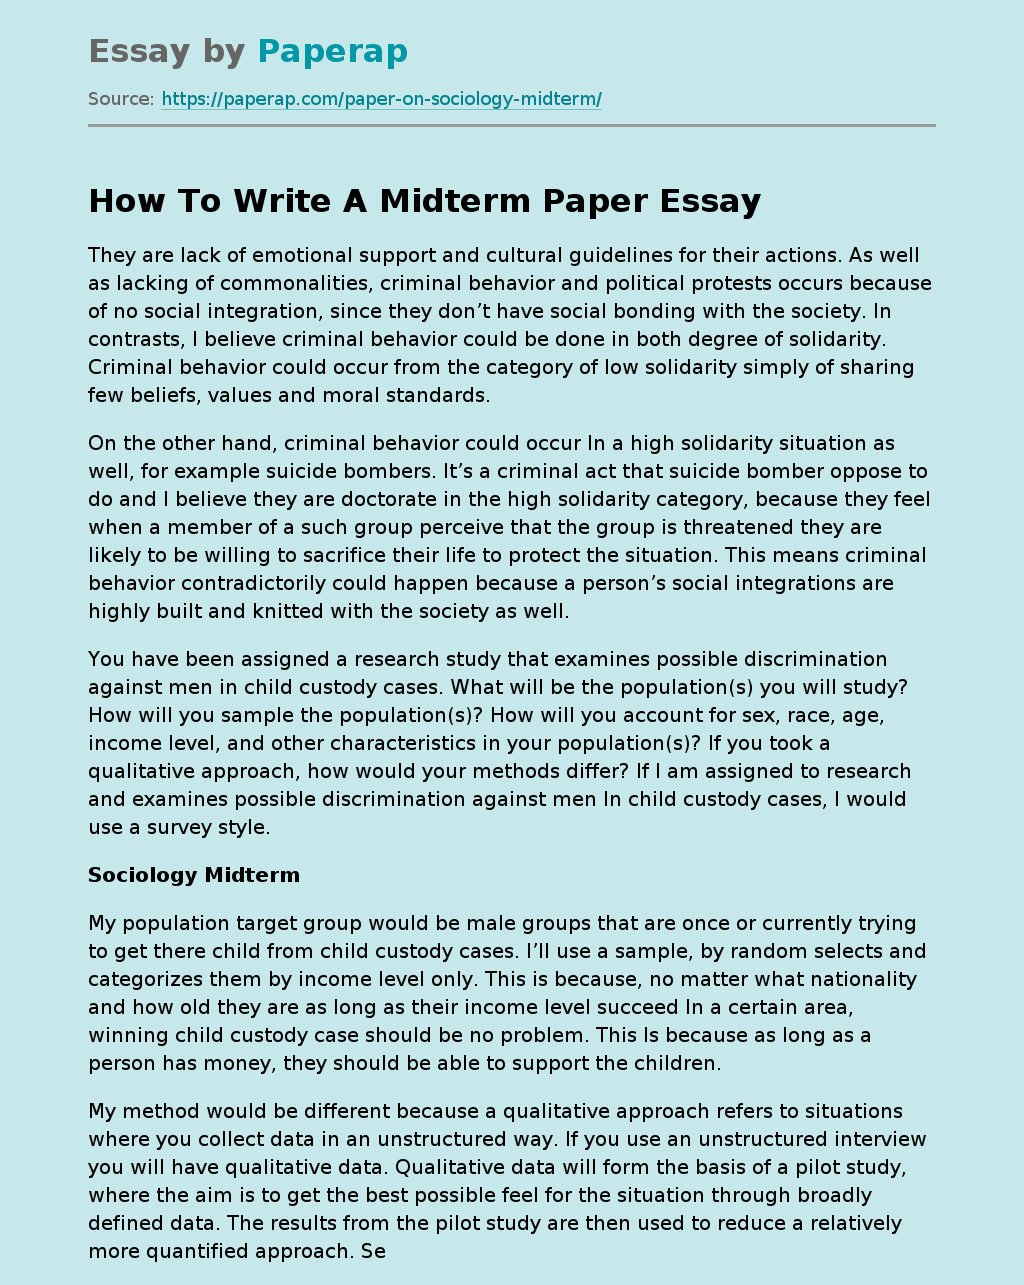 How To Write A Midterm Paper